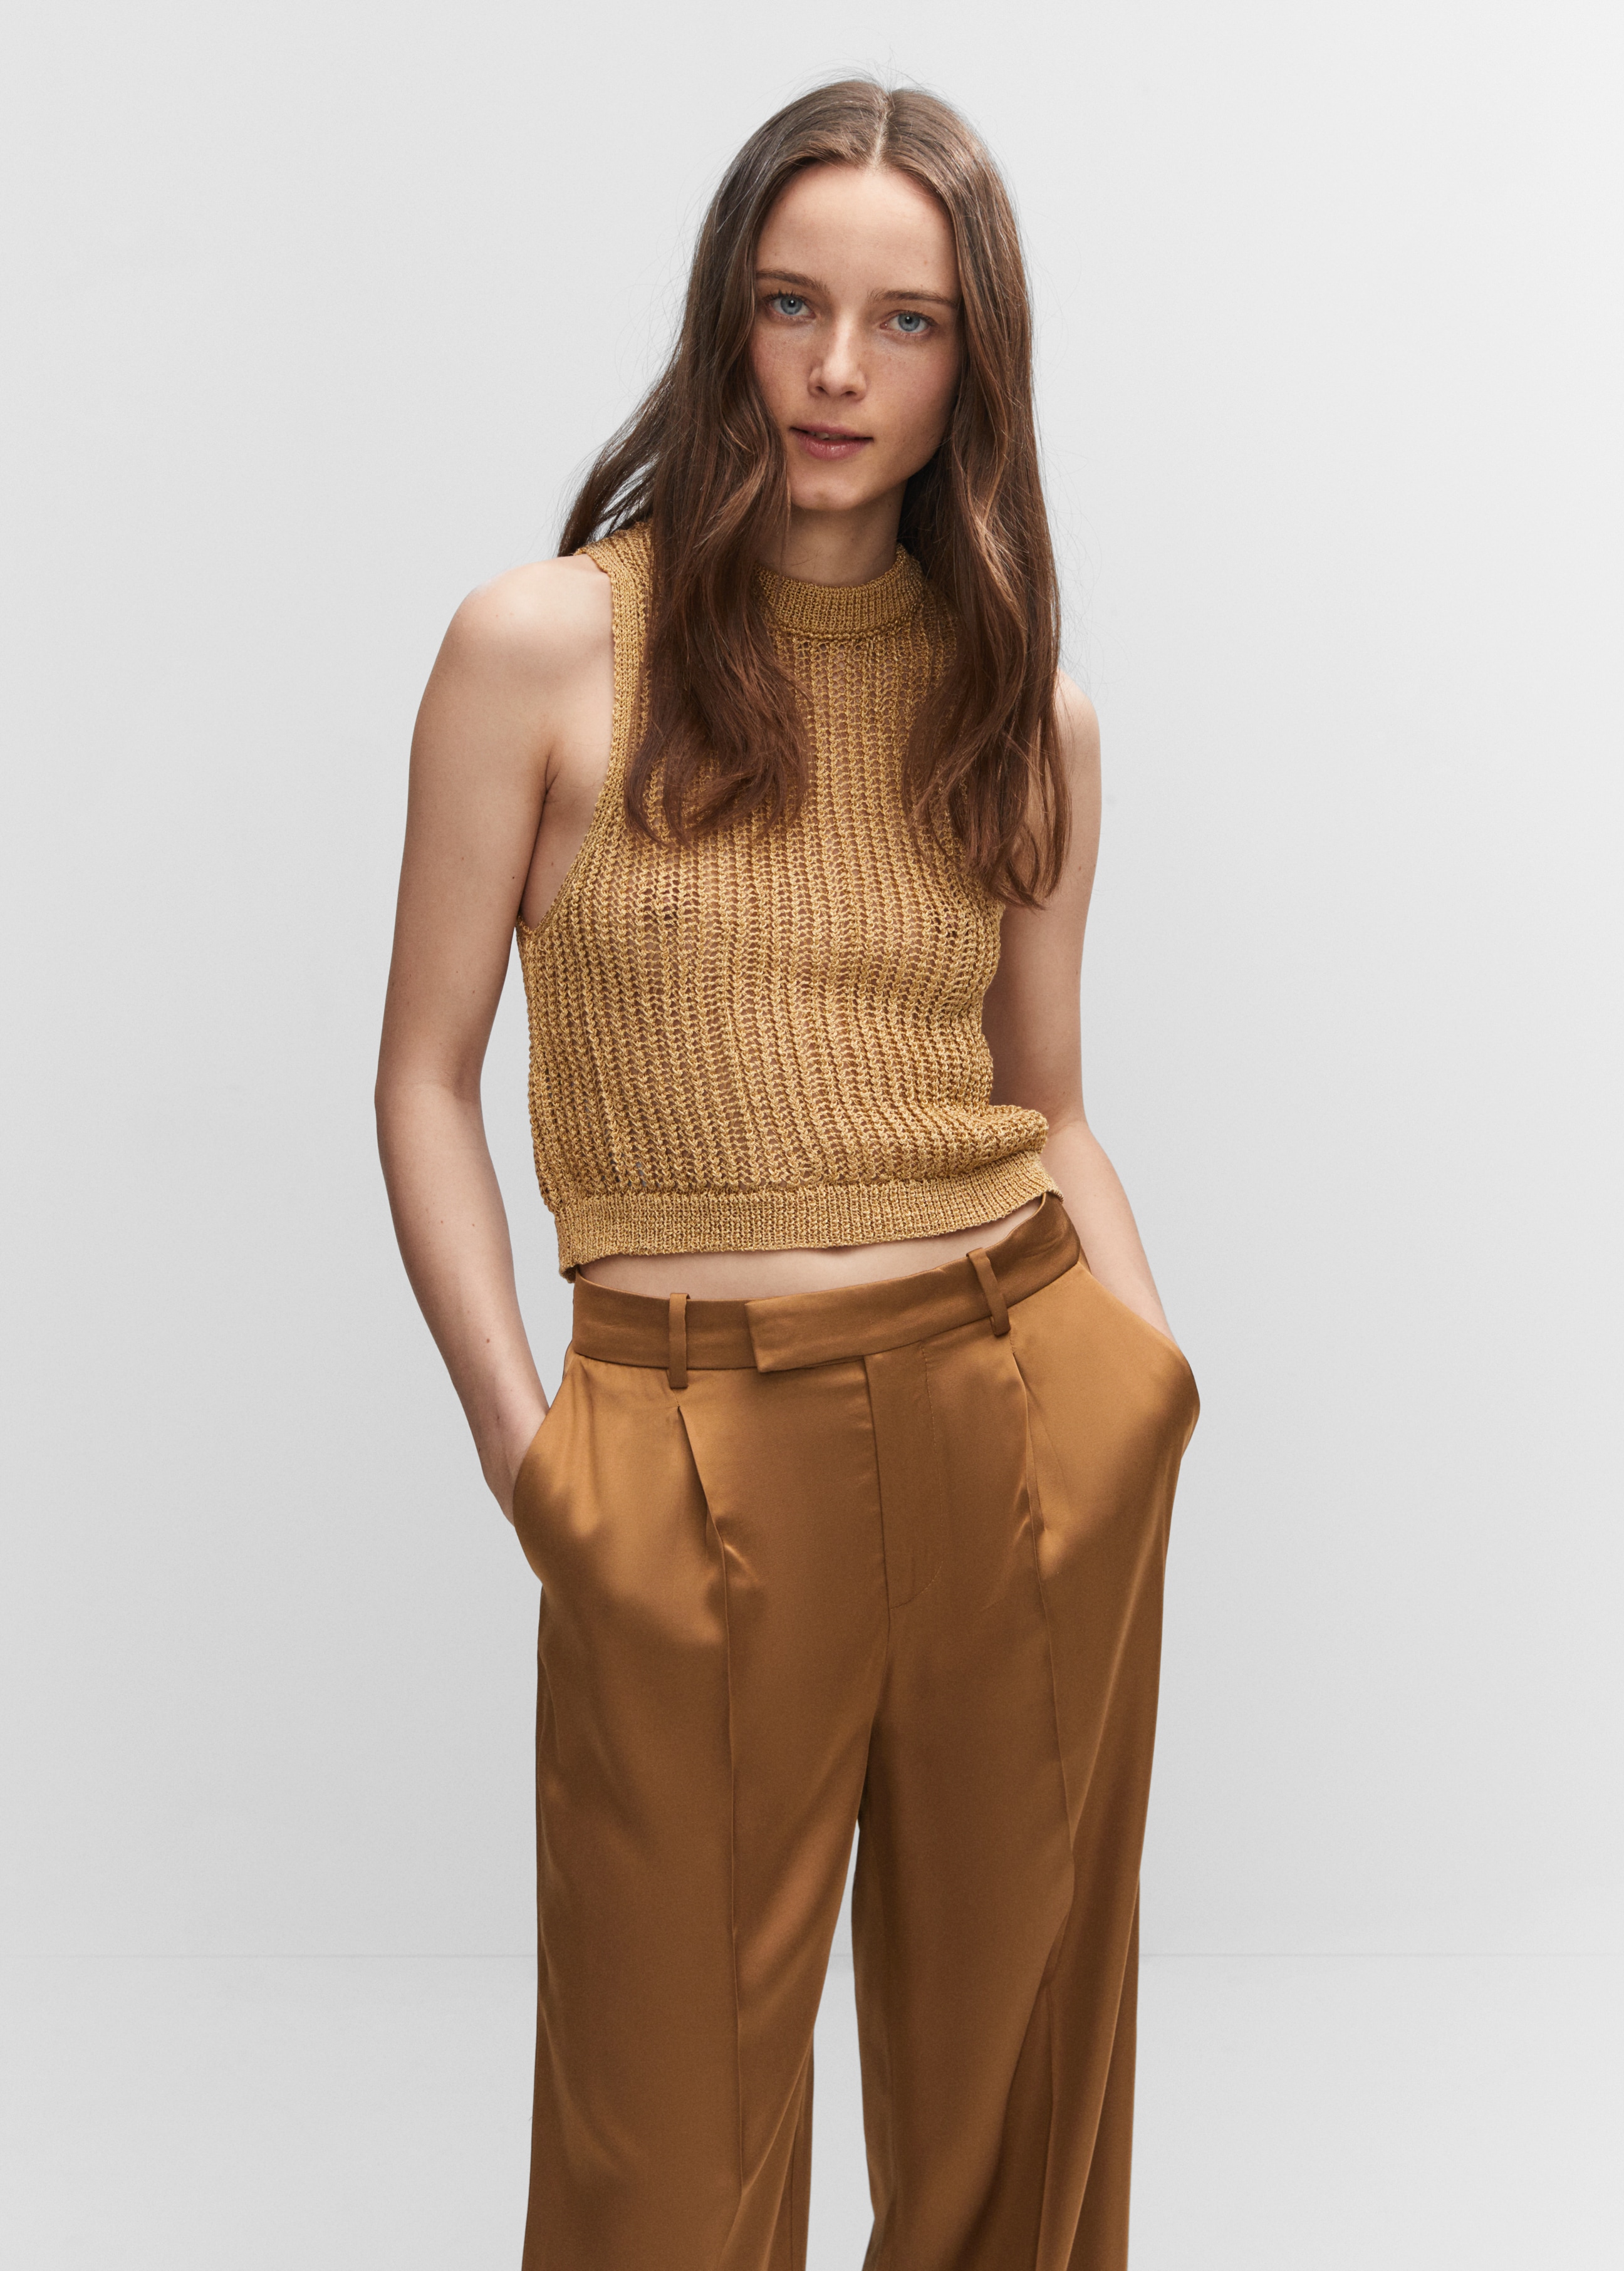 Satin-finish pants with pleat detail